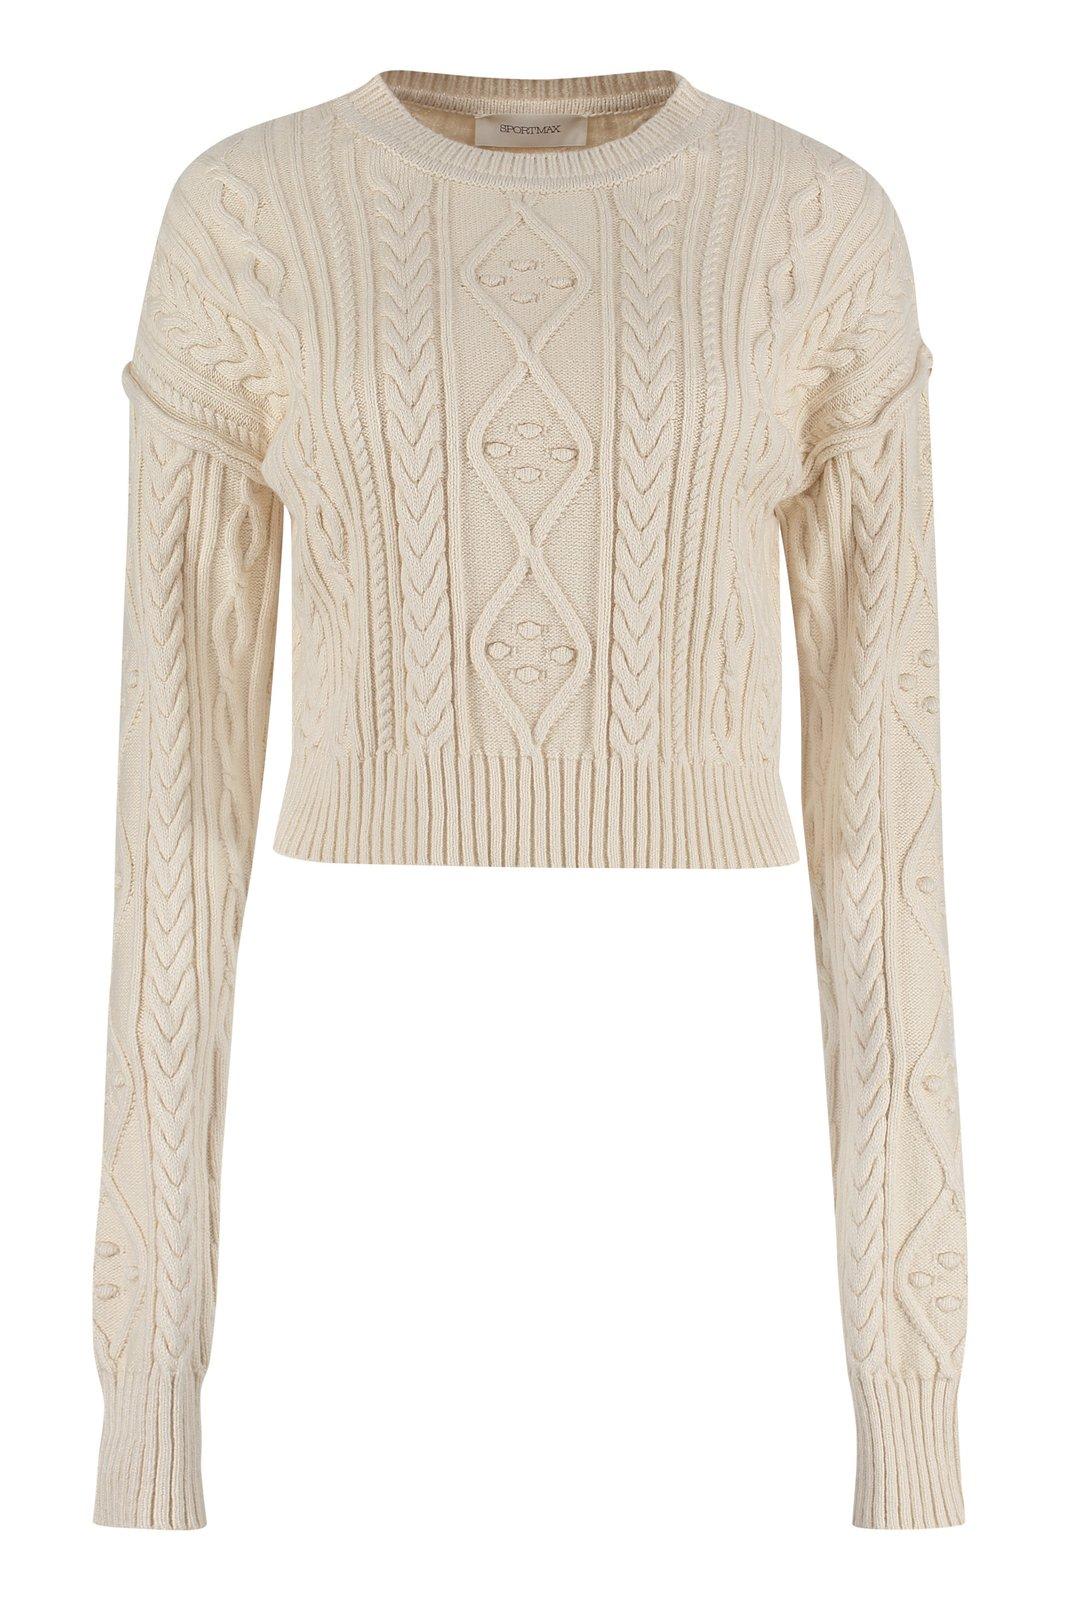 SportMax Knitted Long-sleeved Top